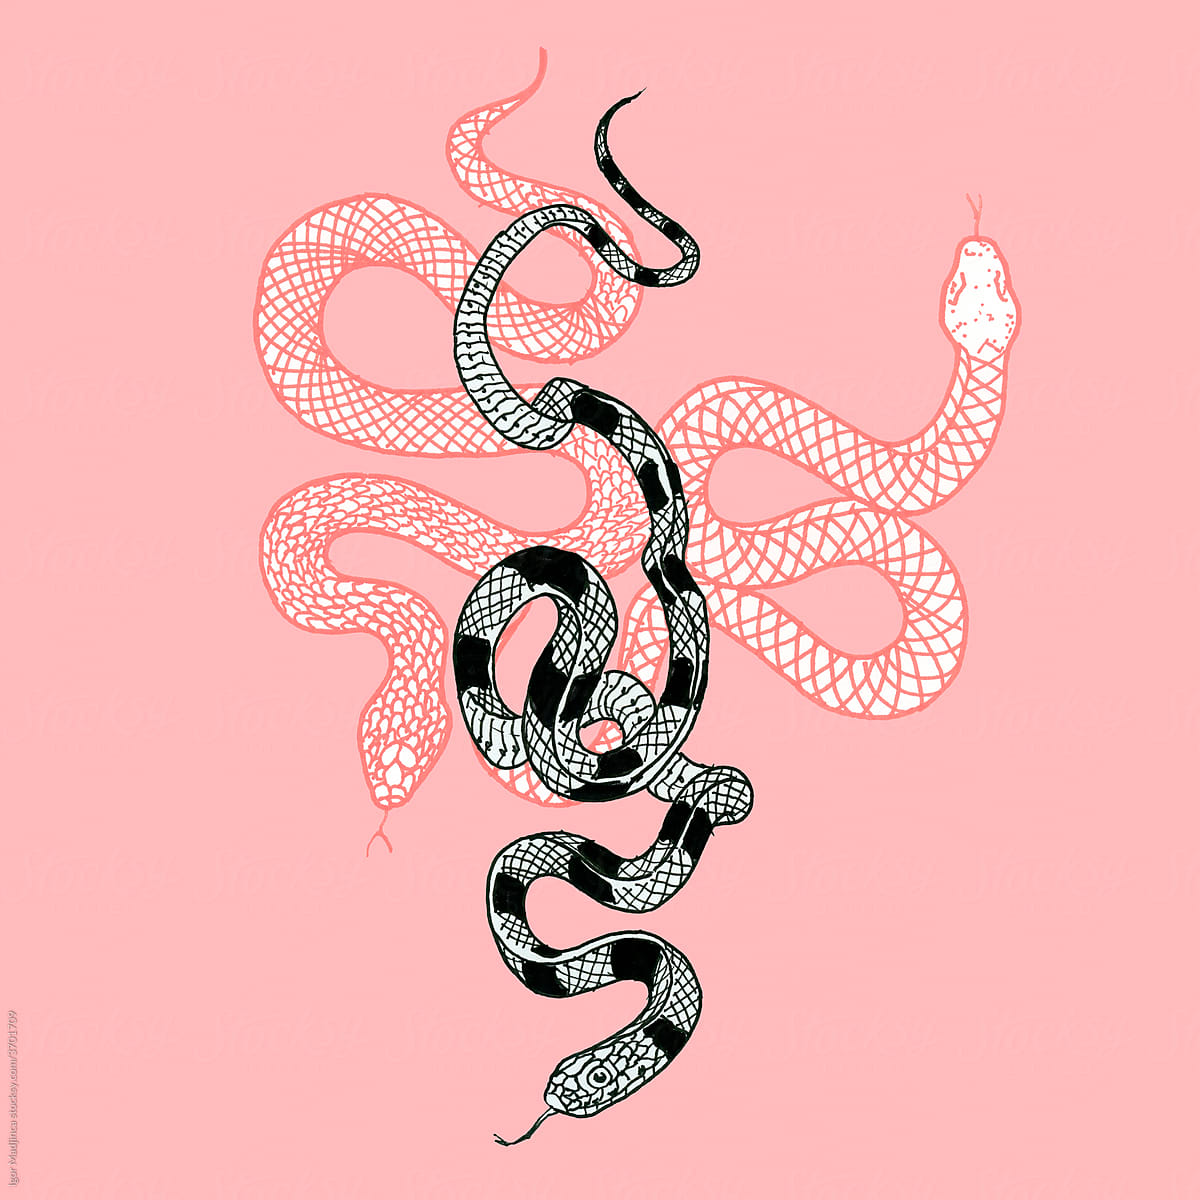 drawing of a snake on a pink background